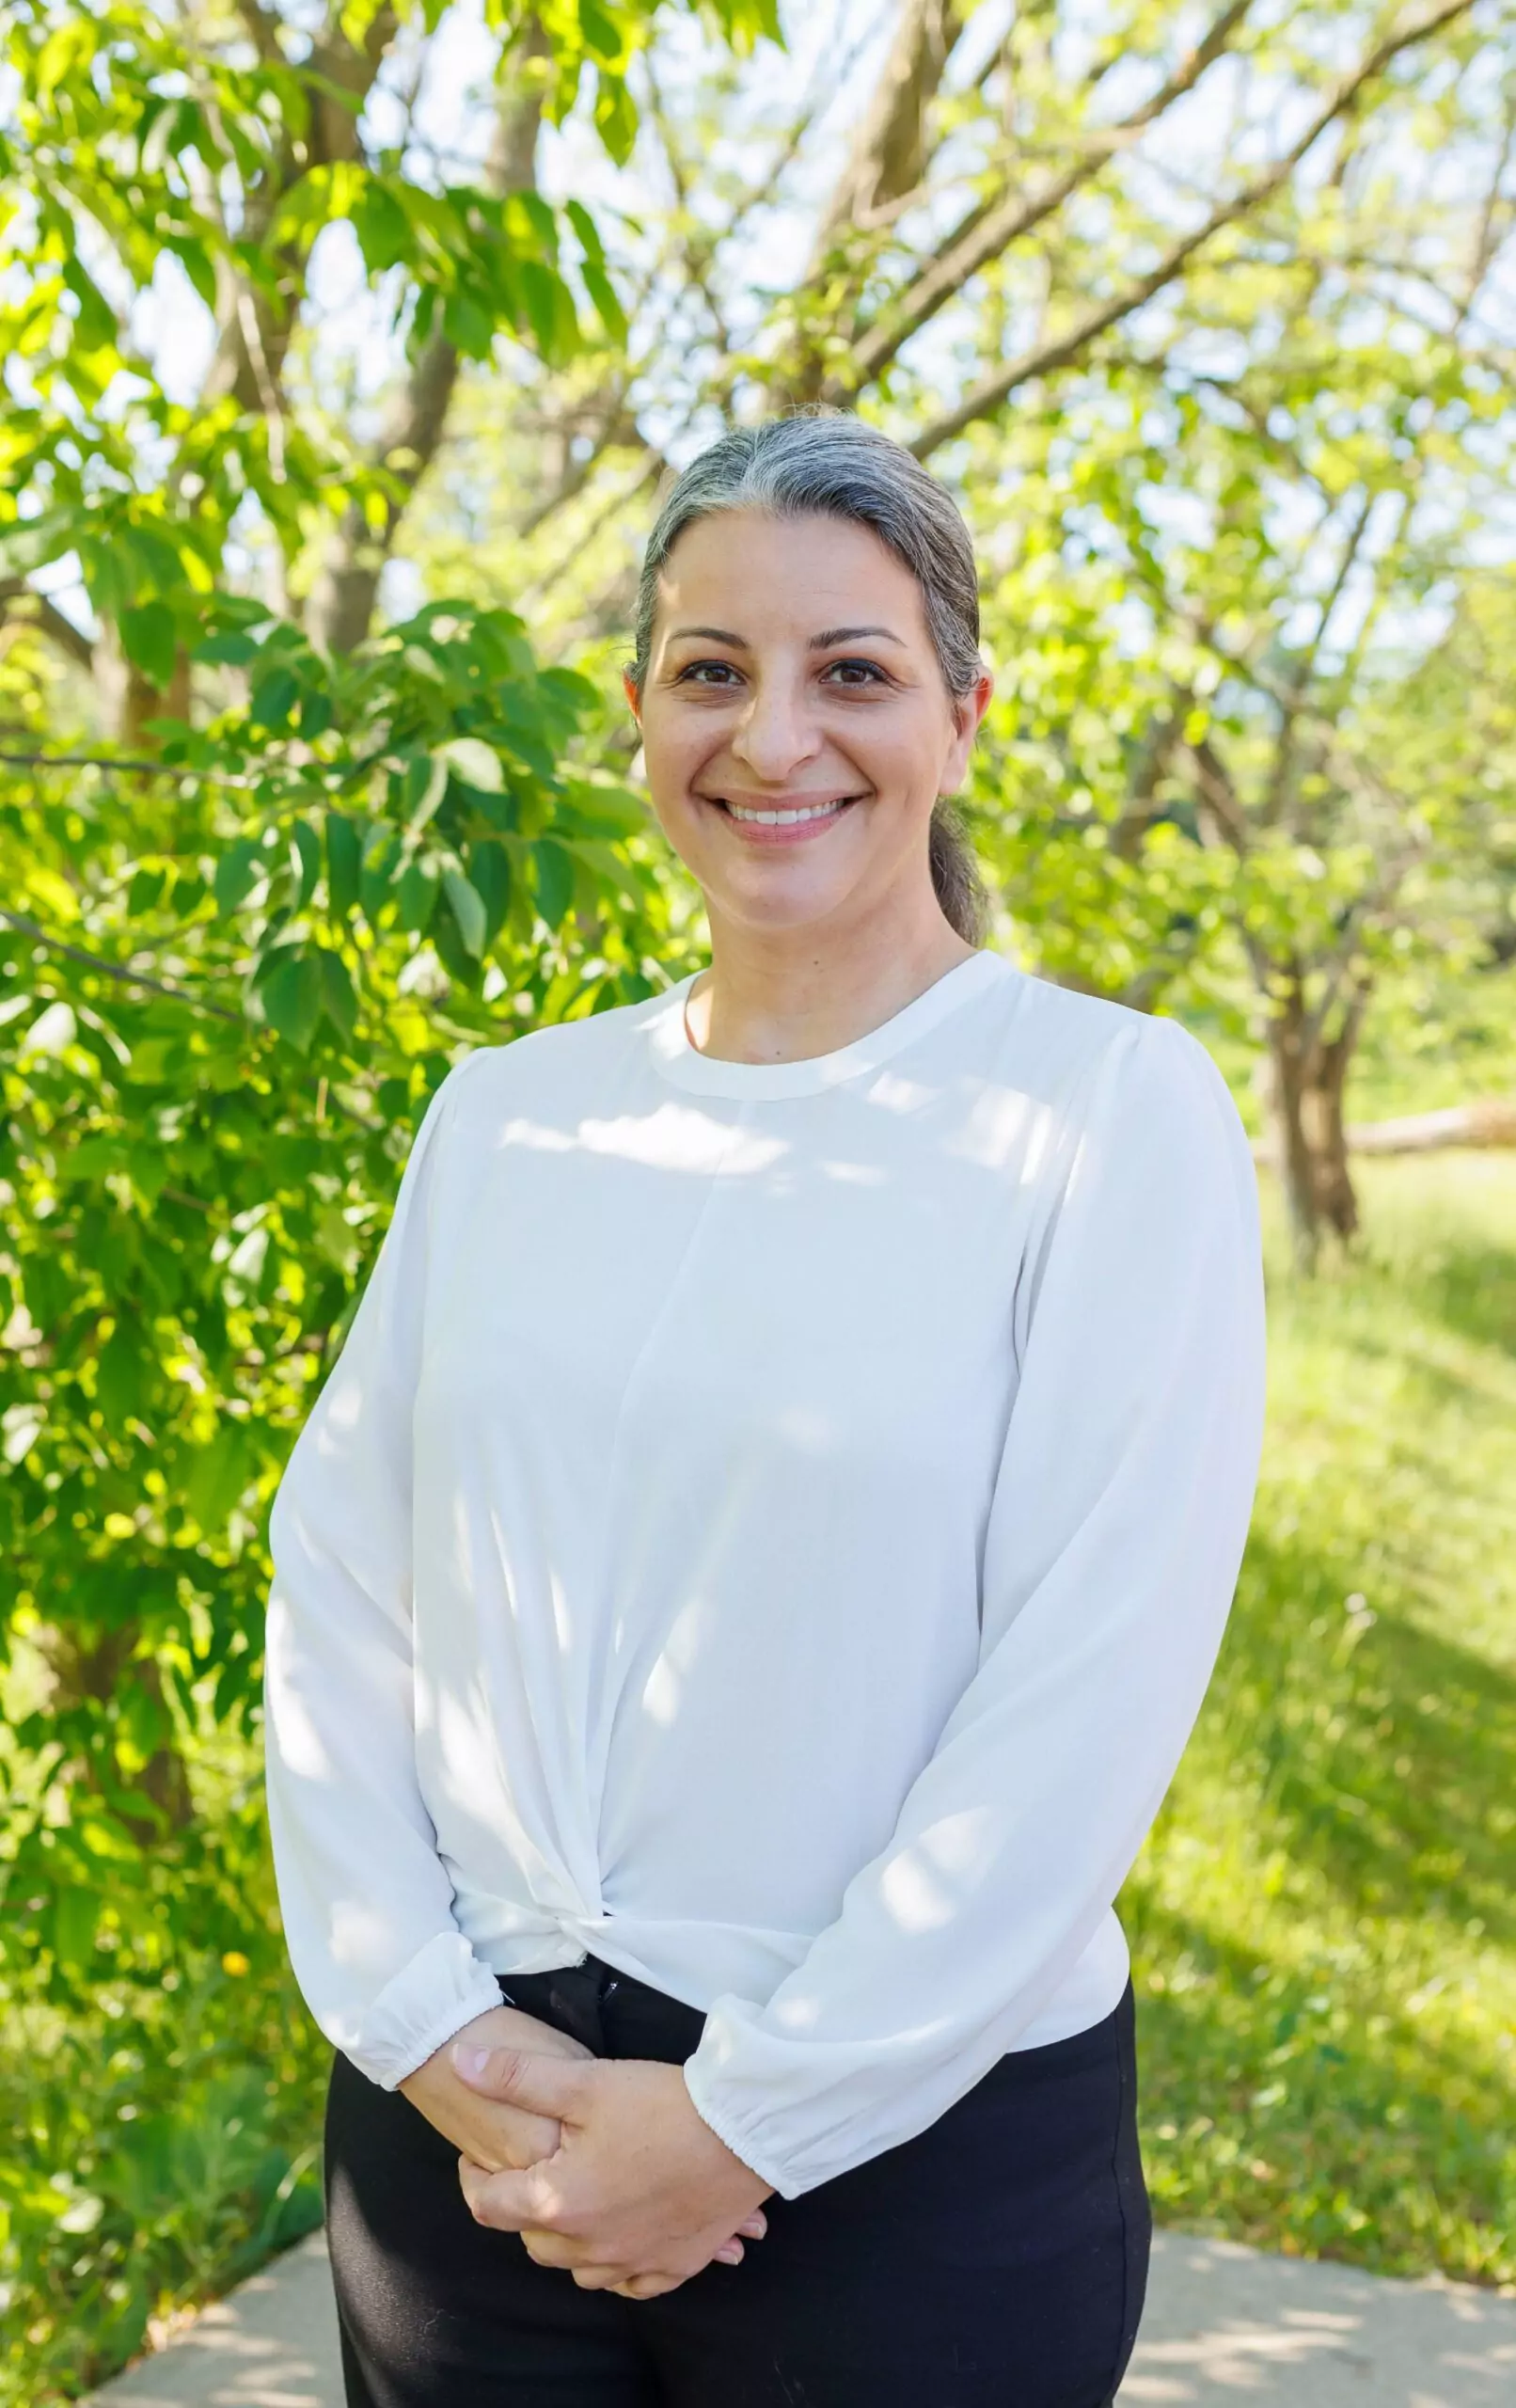 Mary Riposo standing in front of a green tree and grass. She has salt-and-pepper hair pulled back and is smiling. She is wearing a white shirt and dark pants.